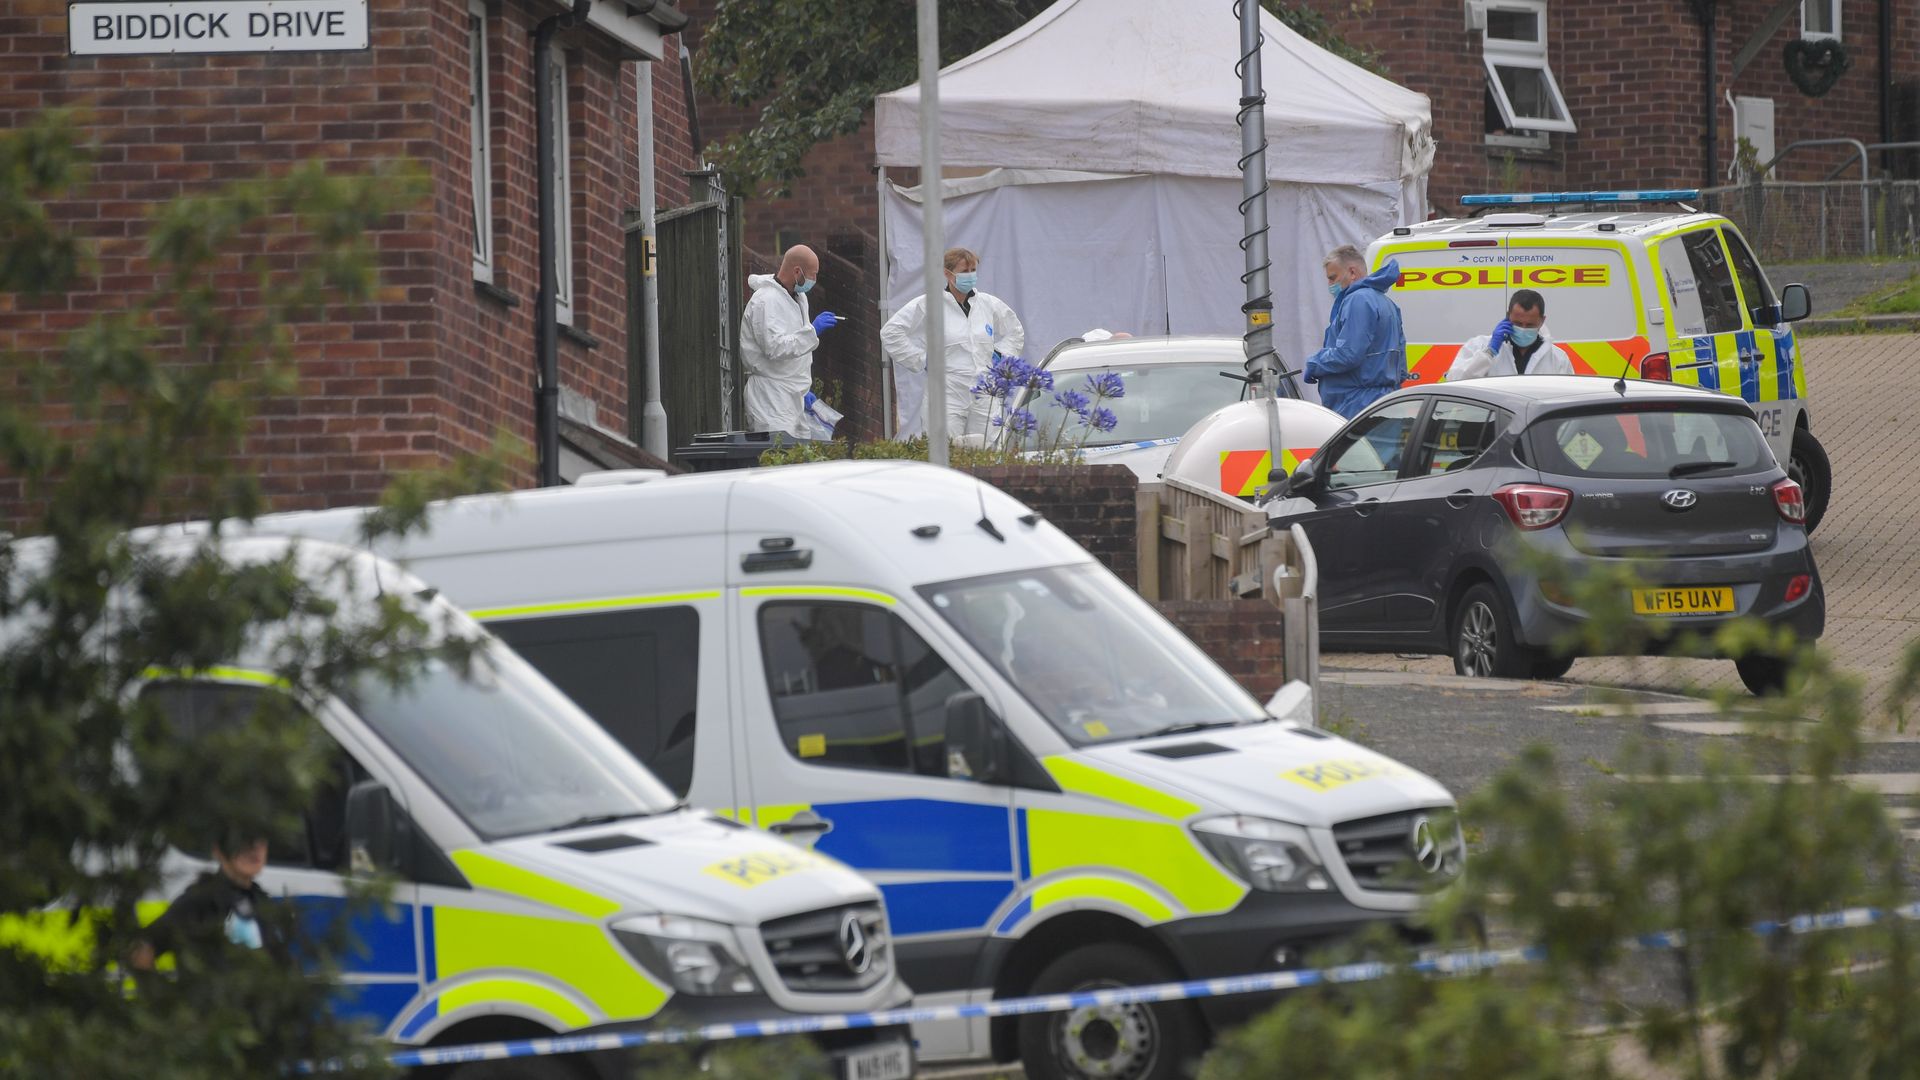 Police at the scene on Biddick Drive on August 13, 2021 in Plymouth, England